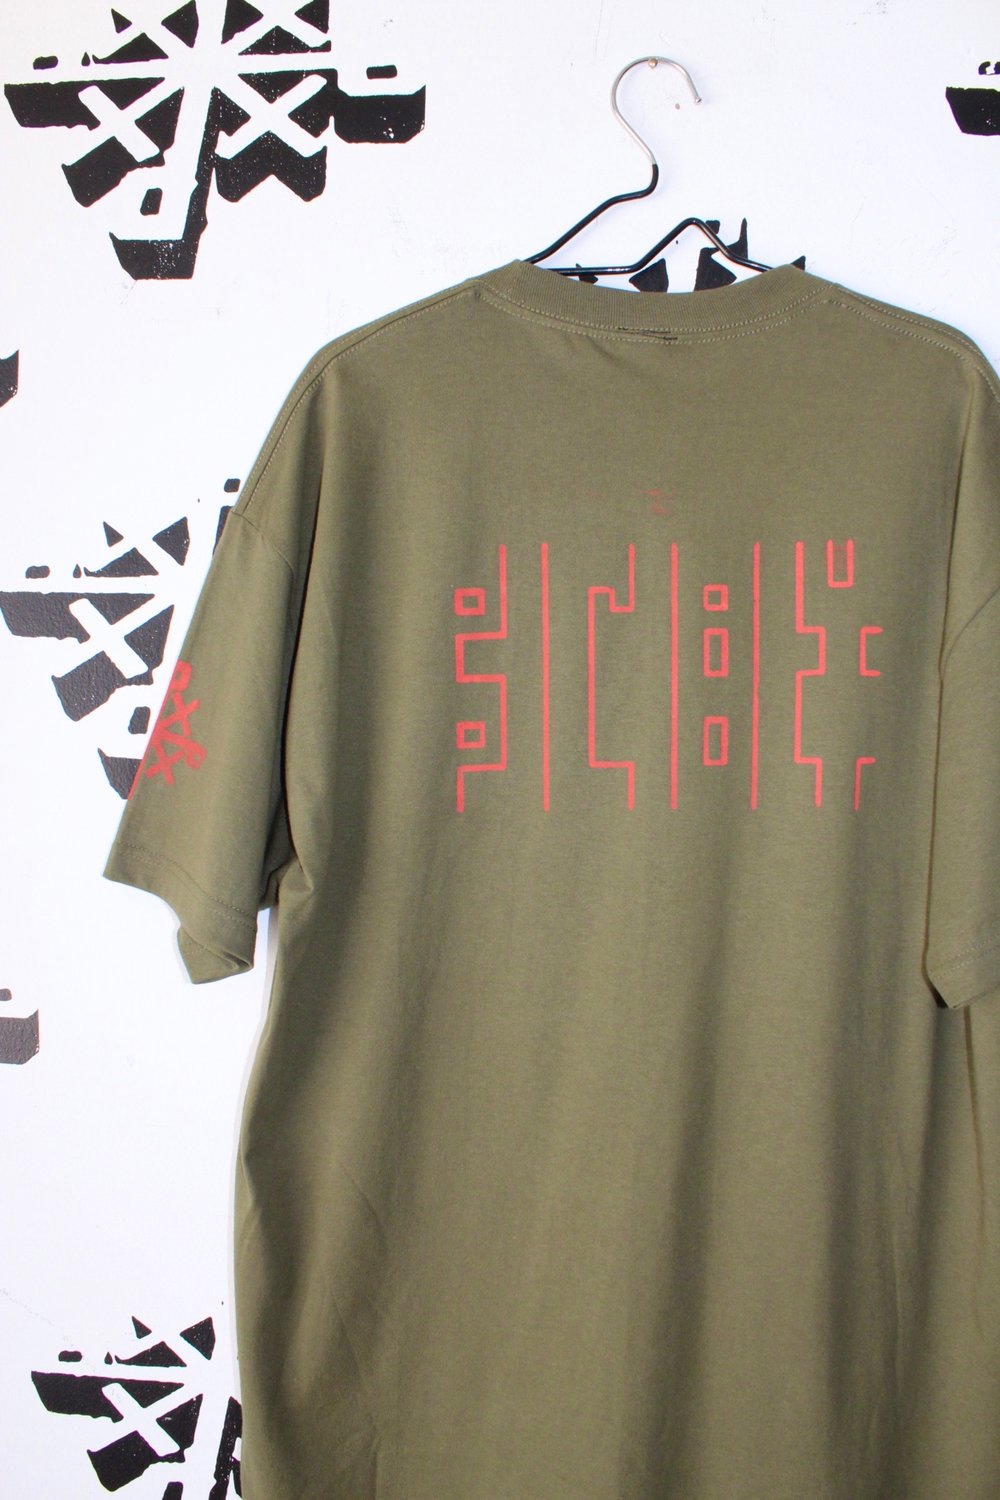 straighten up tee in army green 